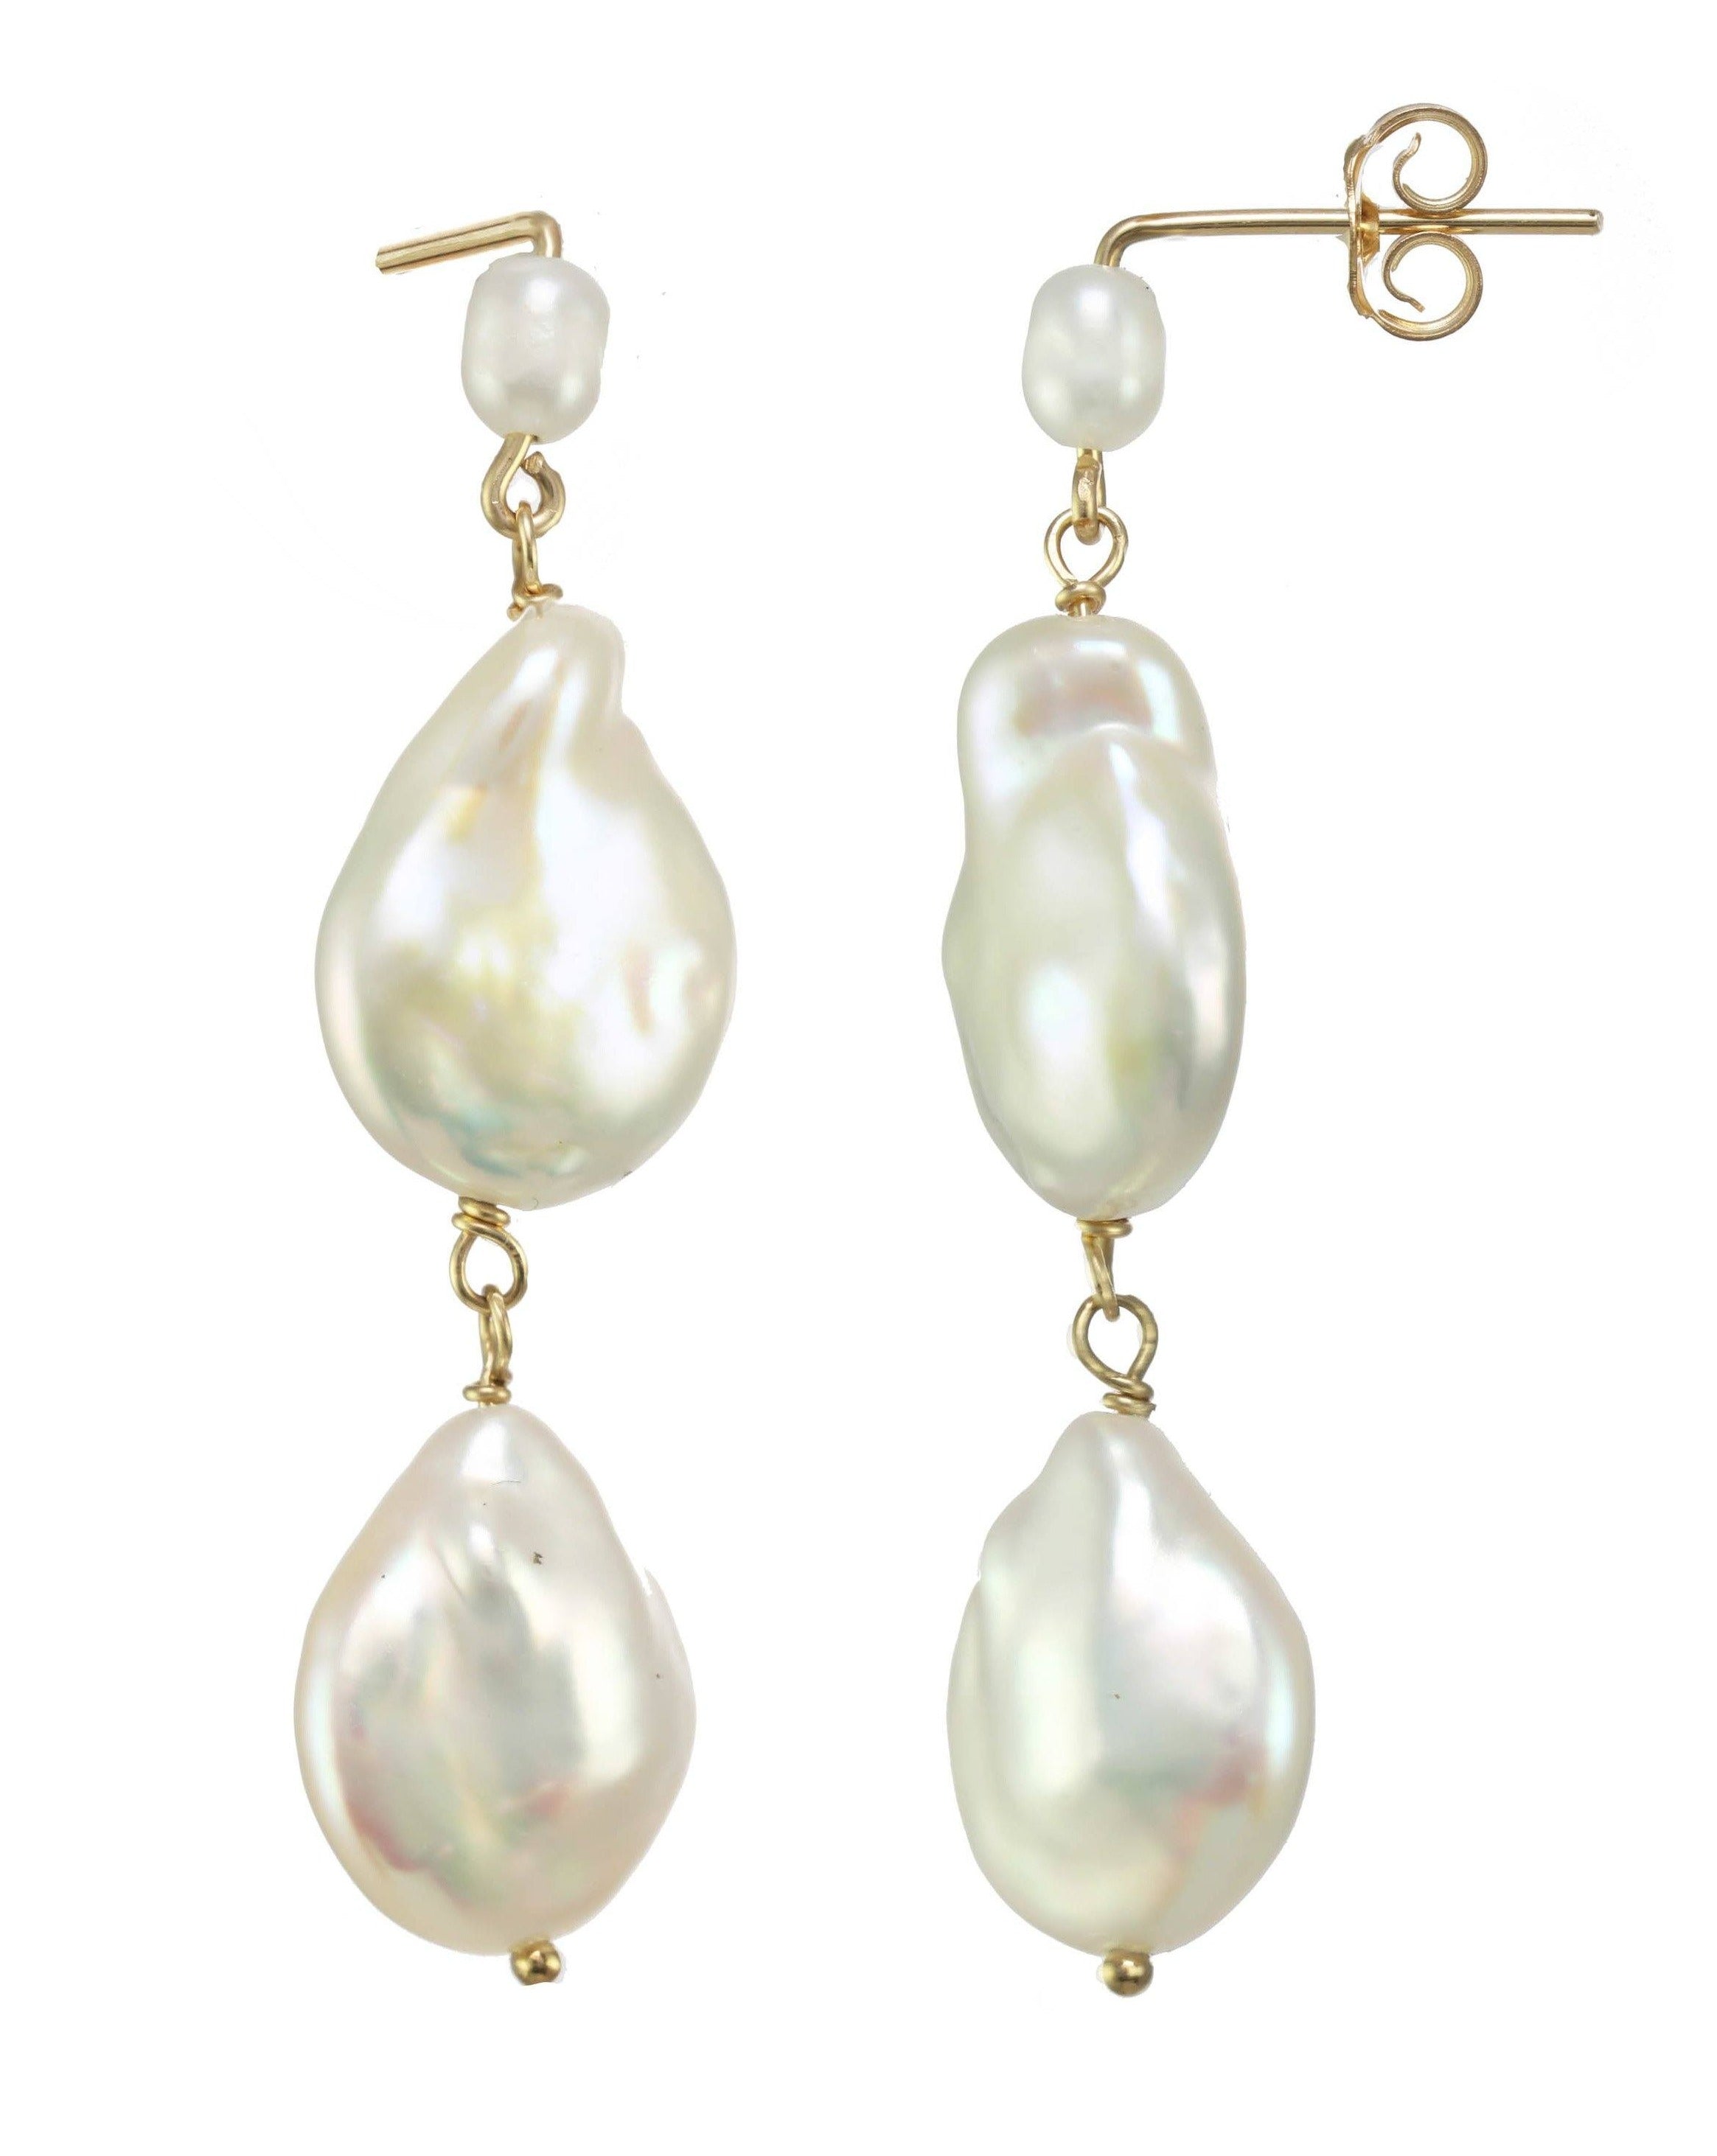 Caro Earrings by KOZAKH. Dangling earrings in 14K Gold Filled with an earring drop length of 2 inches, featuring Freshwater Baroque Pearls.